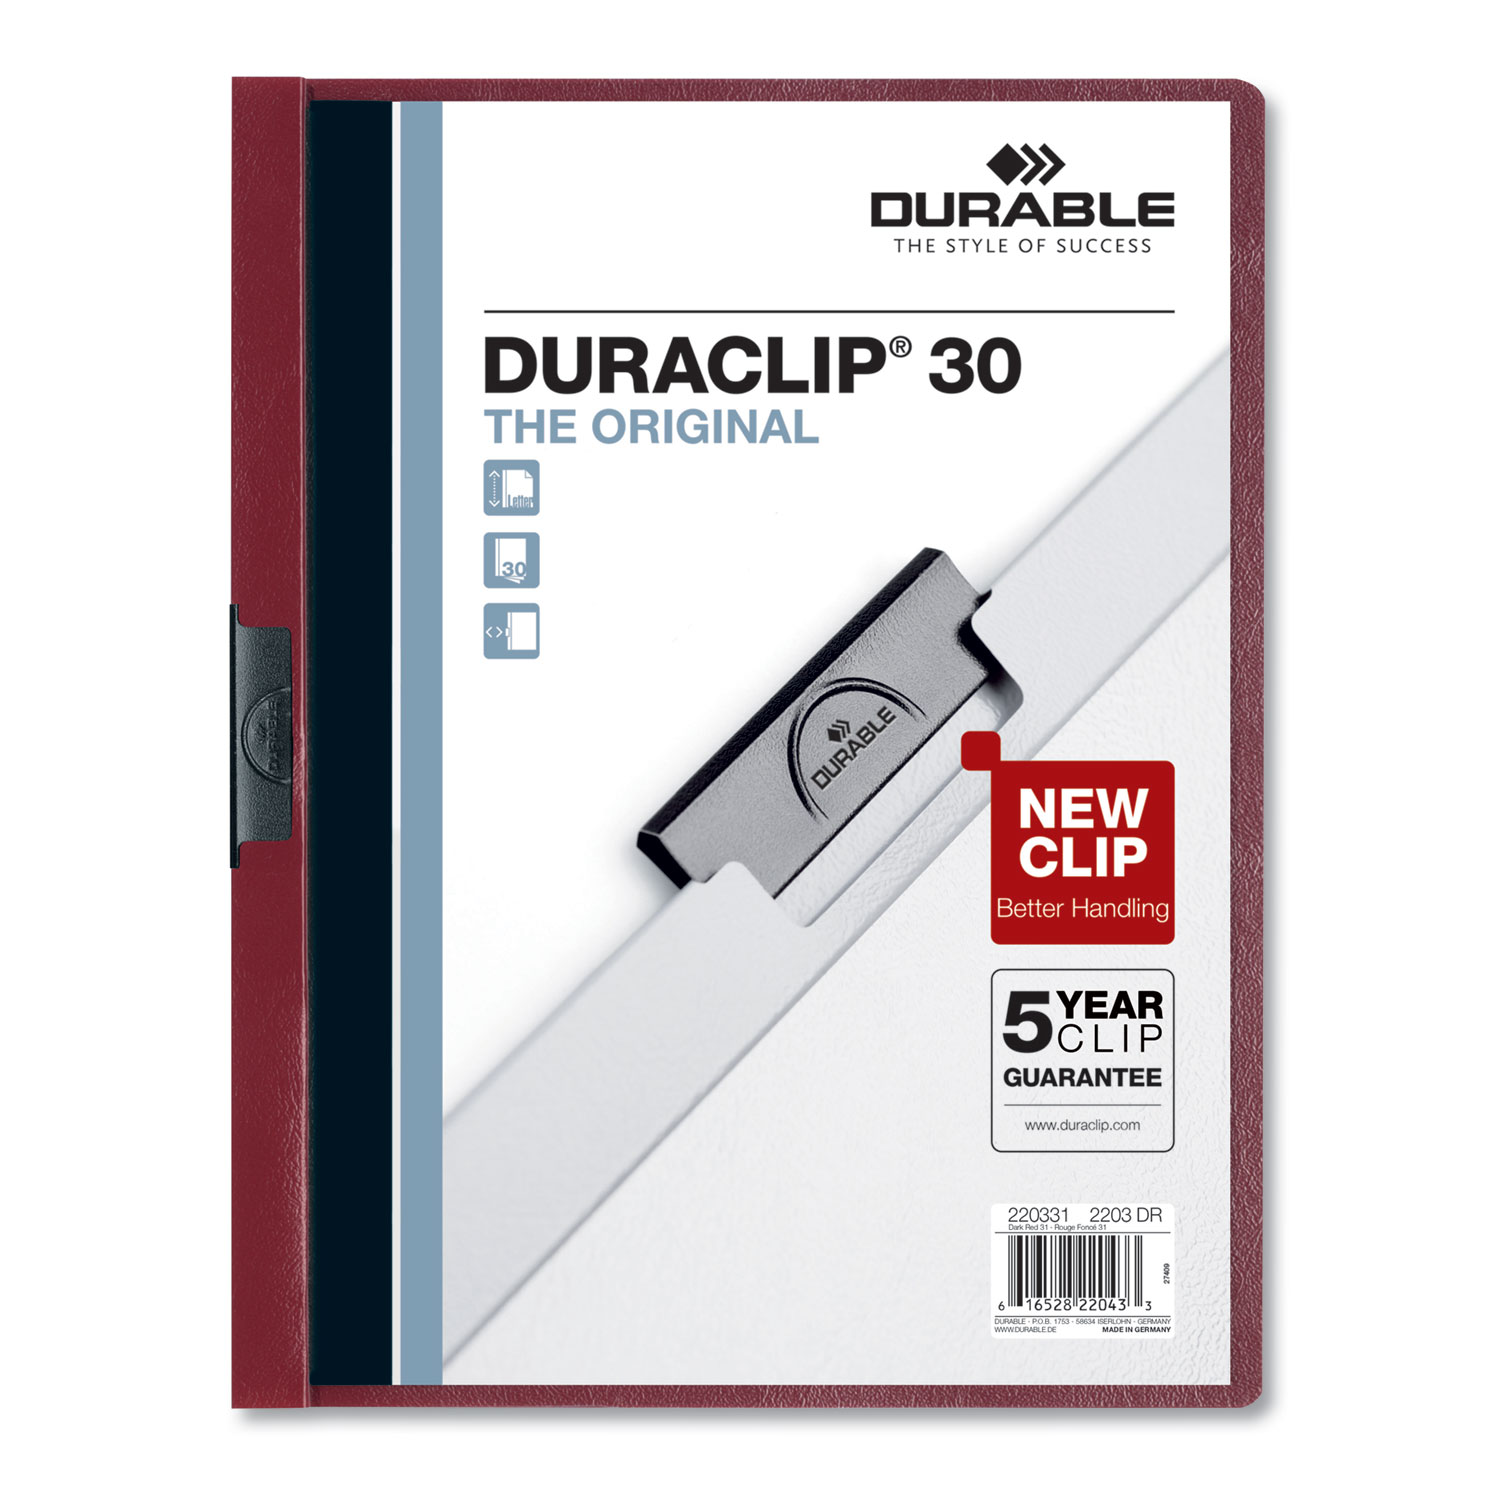  Durable 220331 Vinyl DuraClip Report Cover w/Clip, Letter, Holds 30 Pages, Clear/Maroon, 25/Box (DBL220331) 